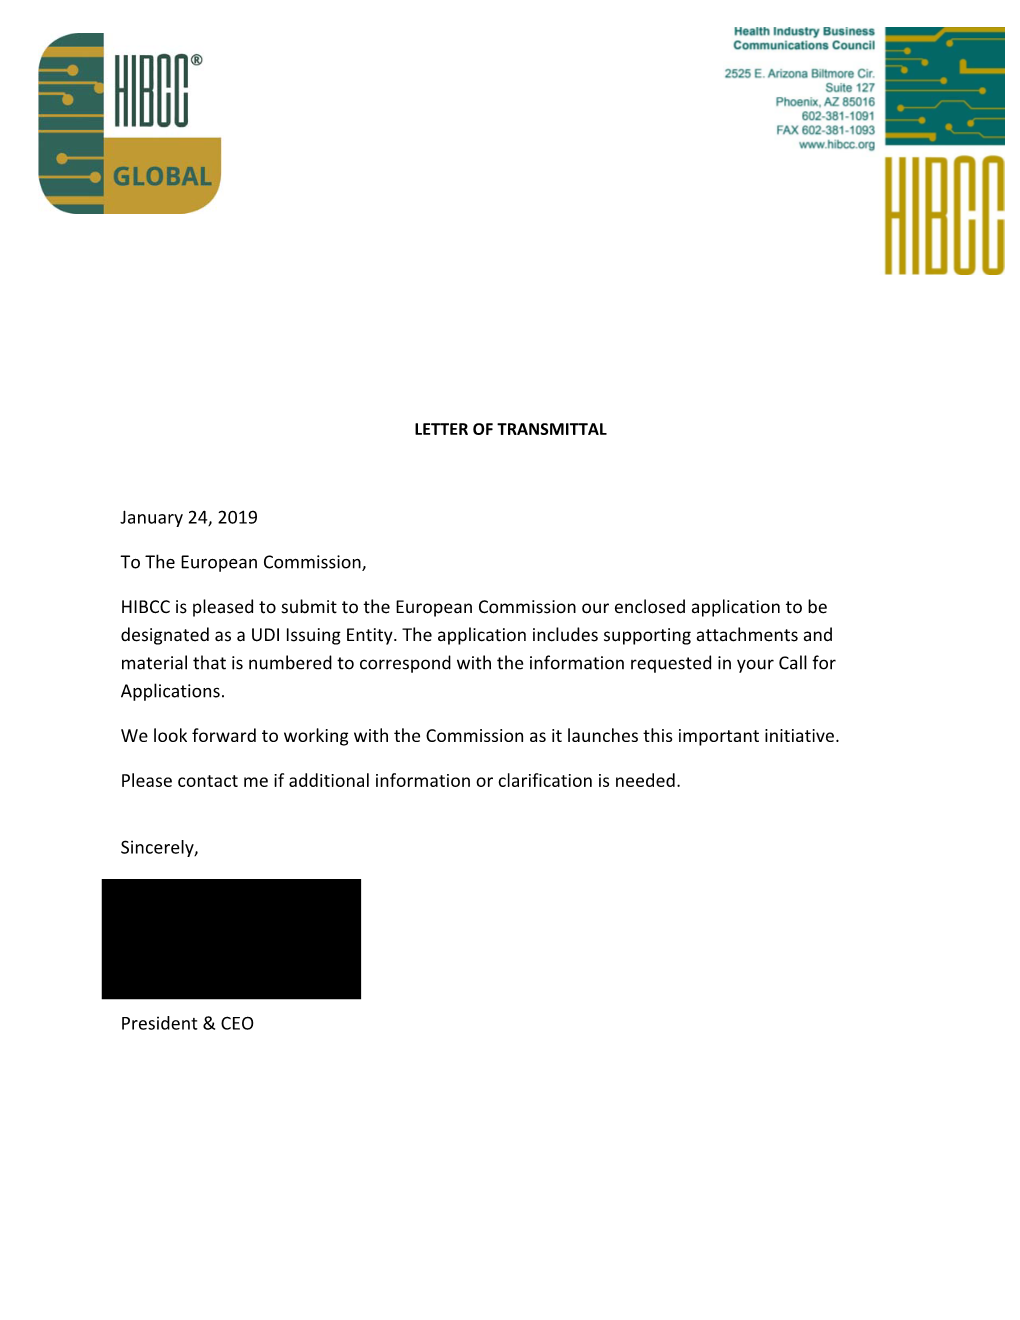 HIBCC Is Pleased to Submit to the European Commission Our Enclosed Application to Be Designated As a UDI Issuing Entity